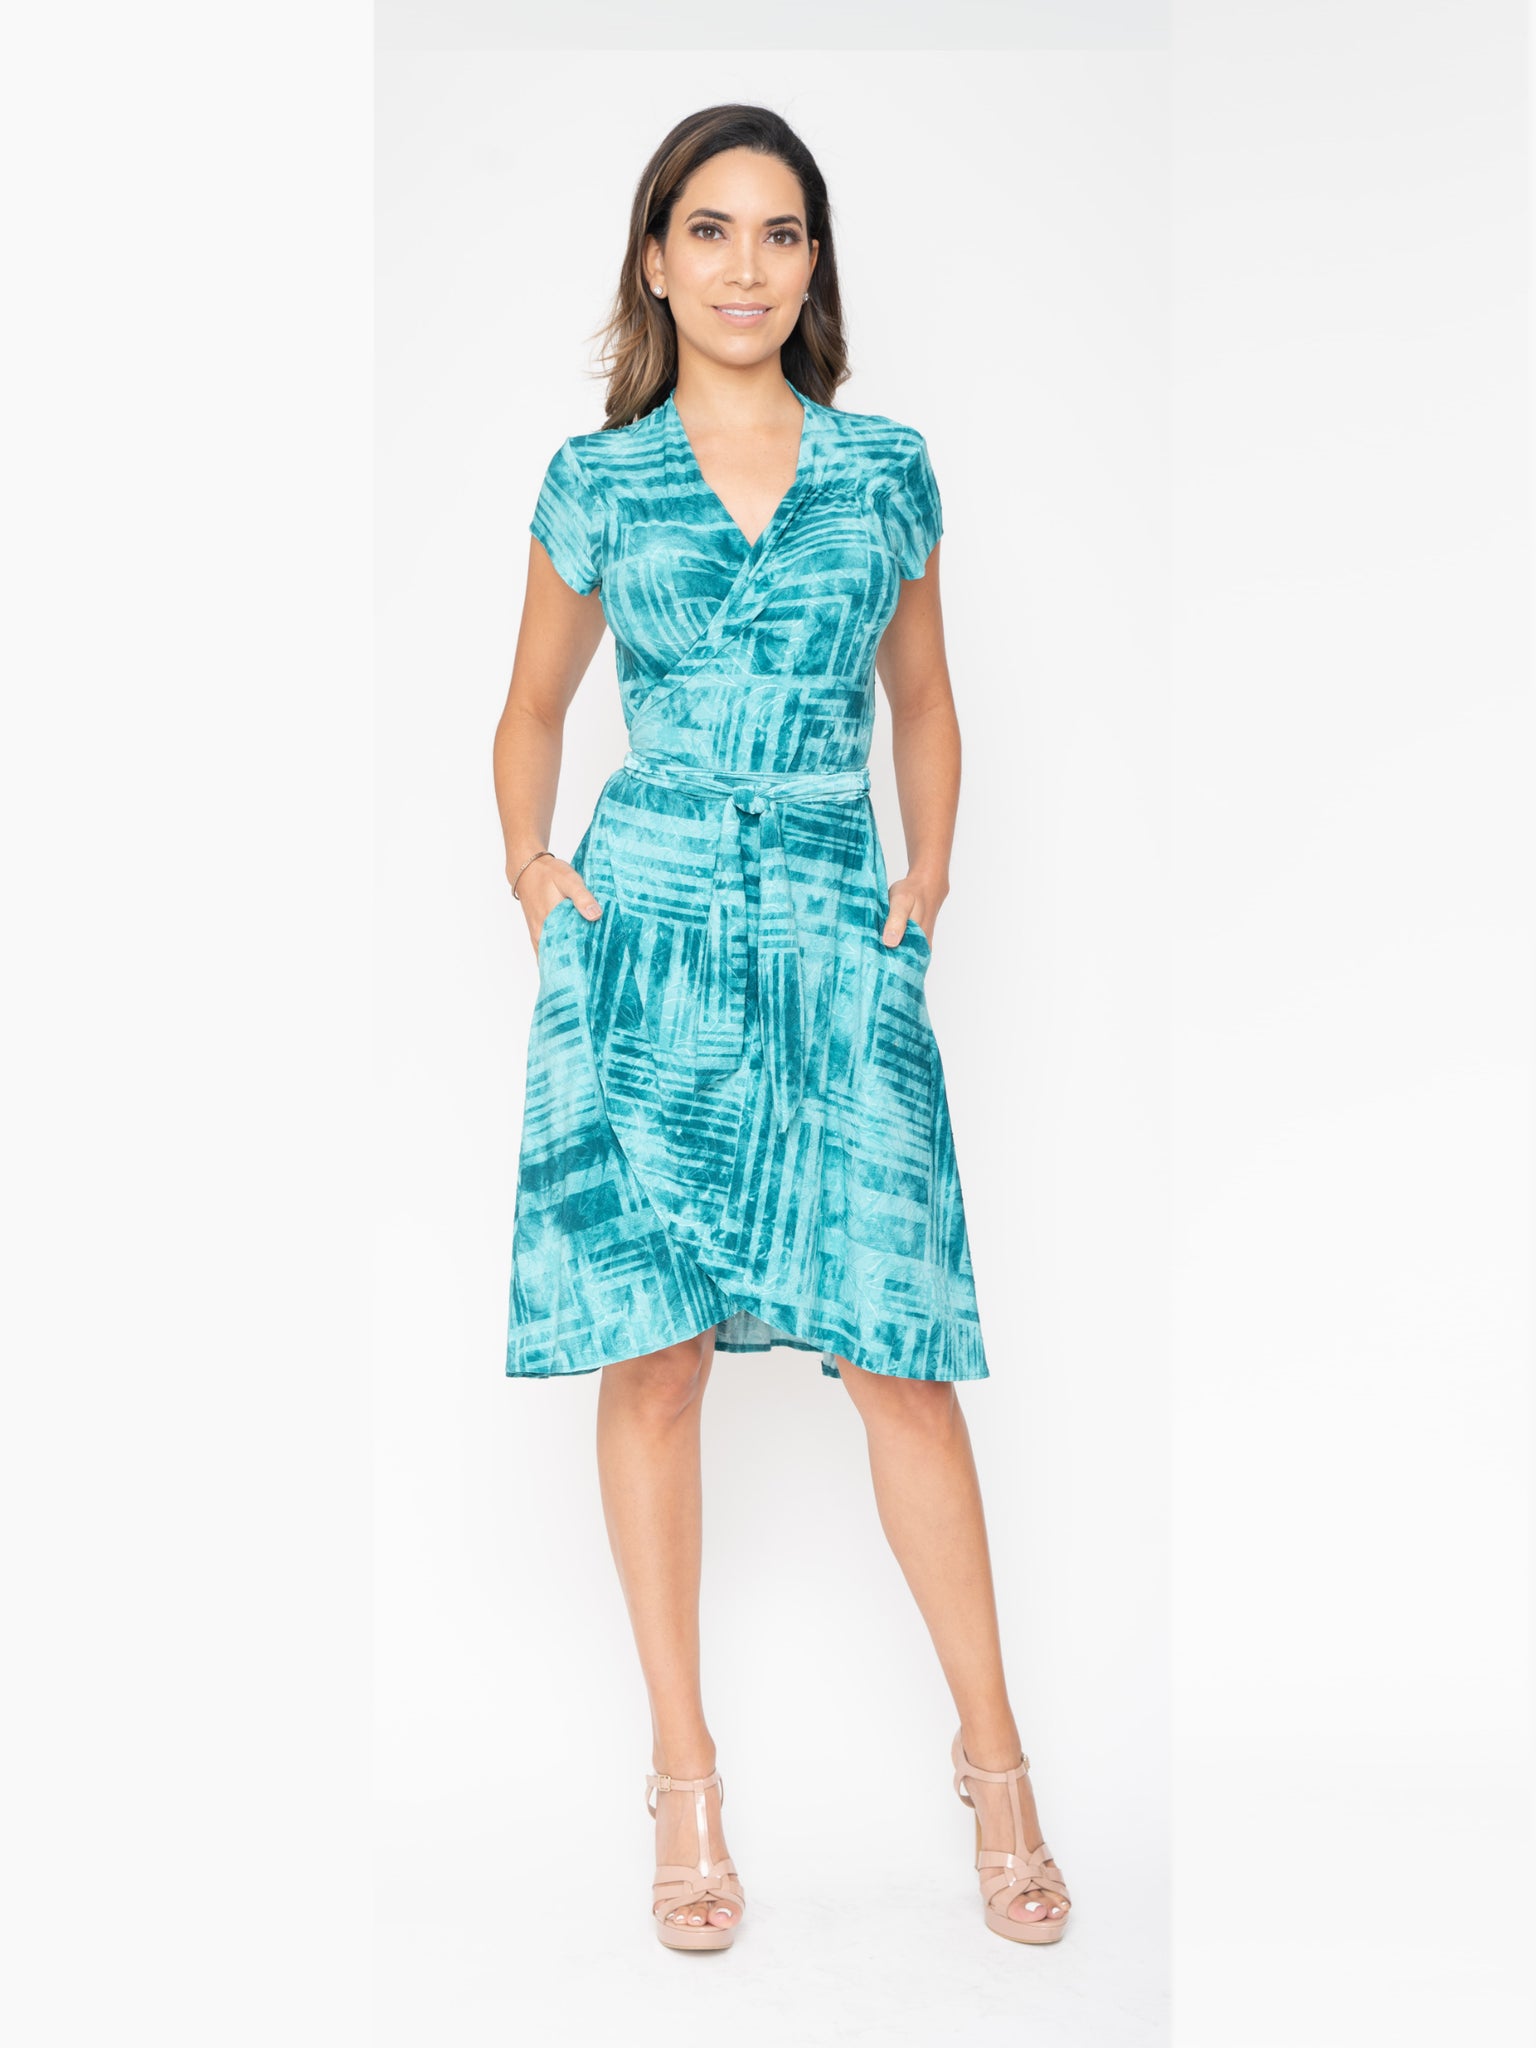 Business Casual Wrap Dress – About the Stitch